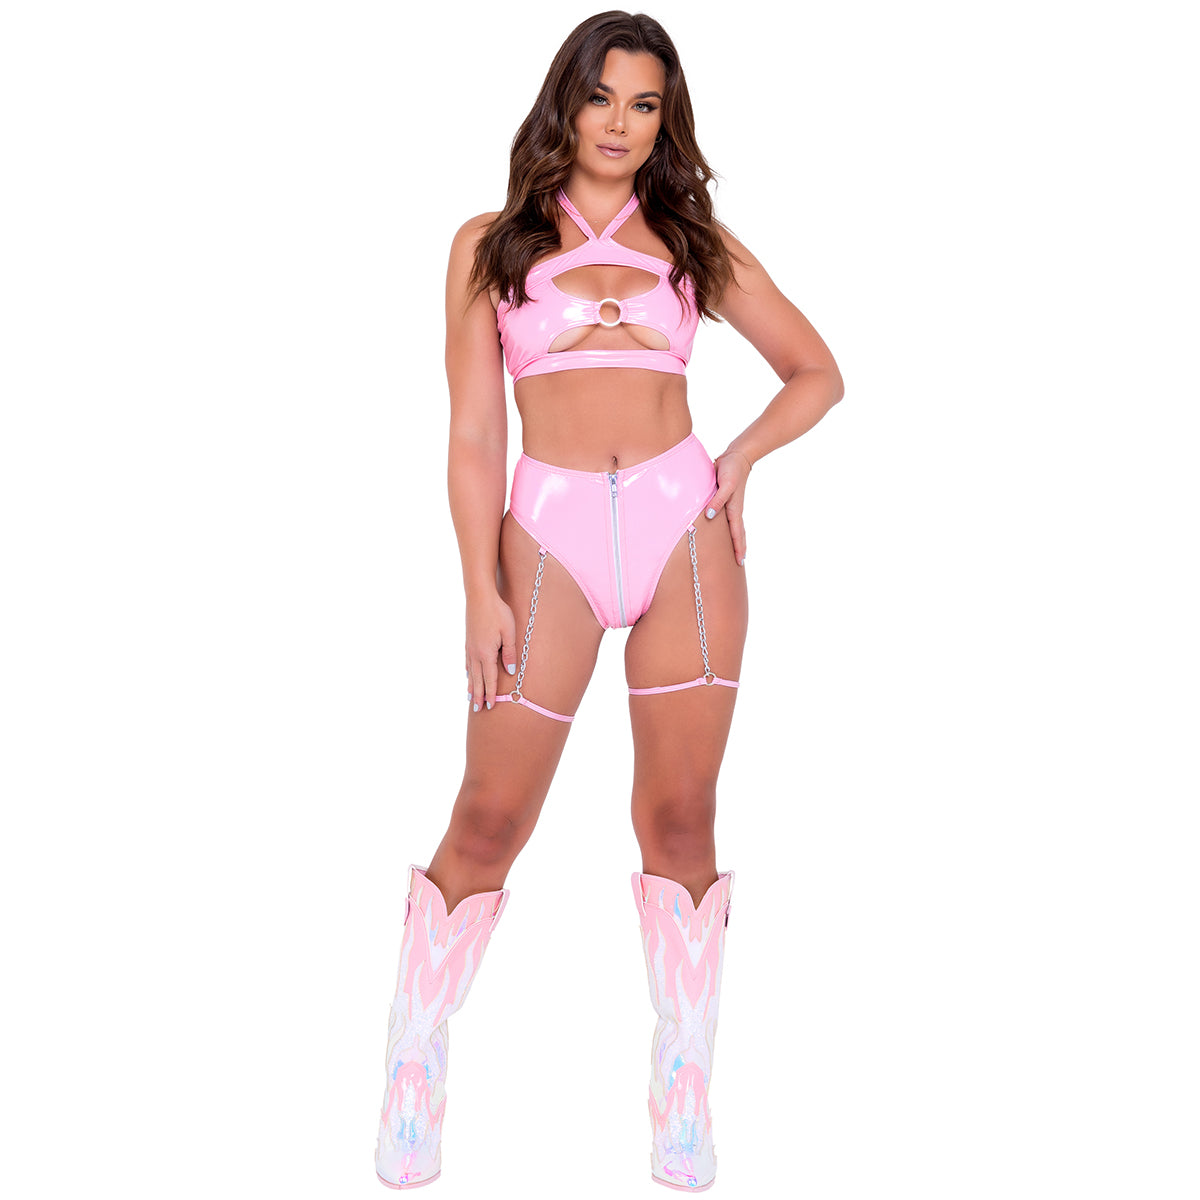 Vinyl Top Baby Pink 6117 front view shown with shorts 6118